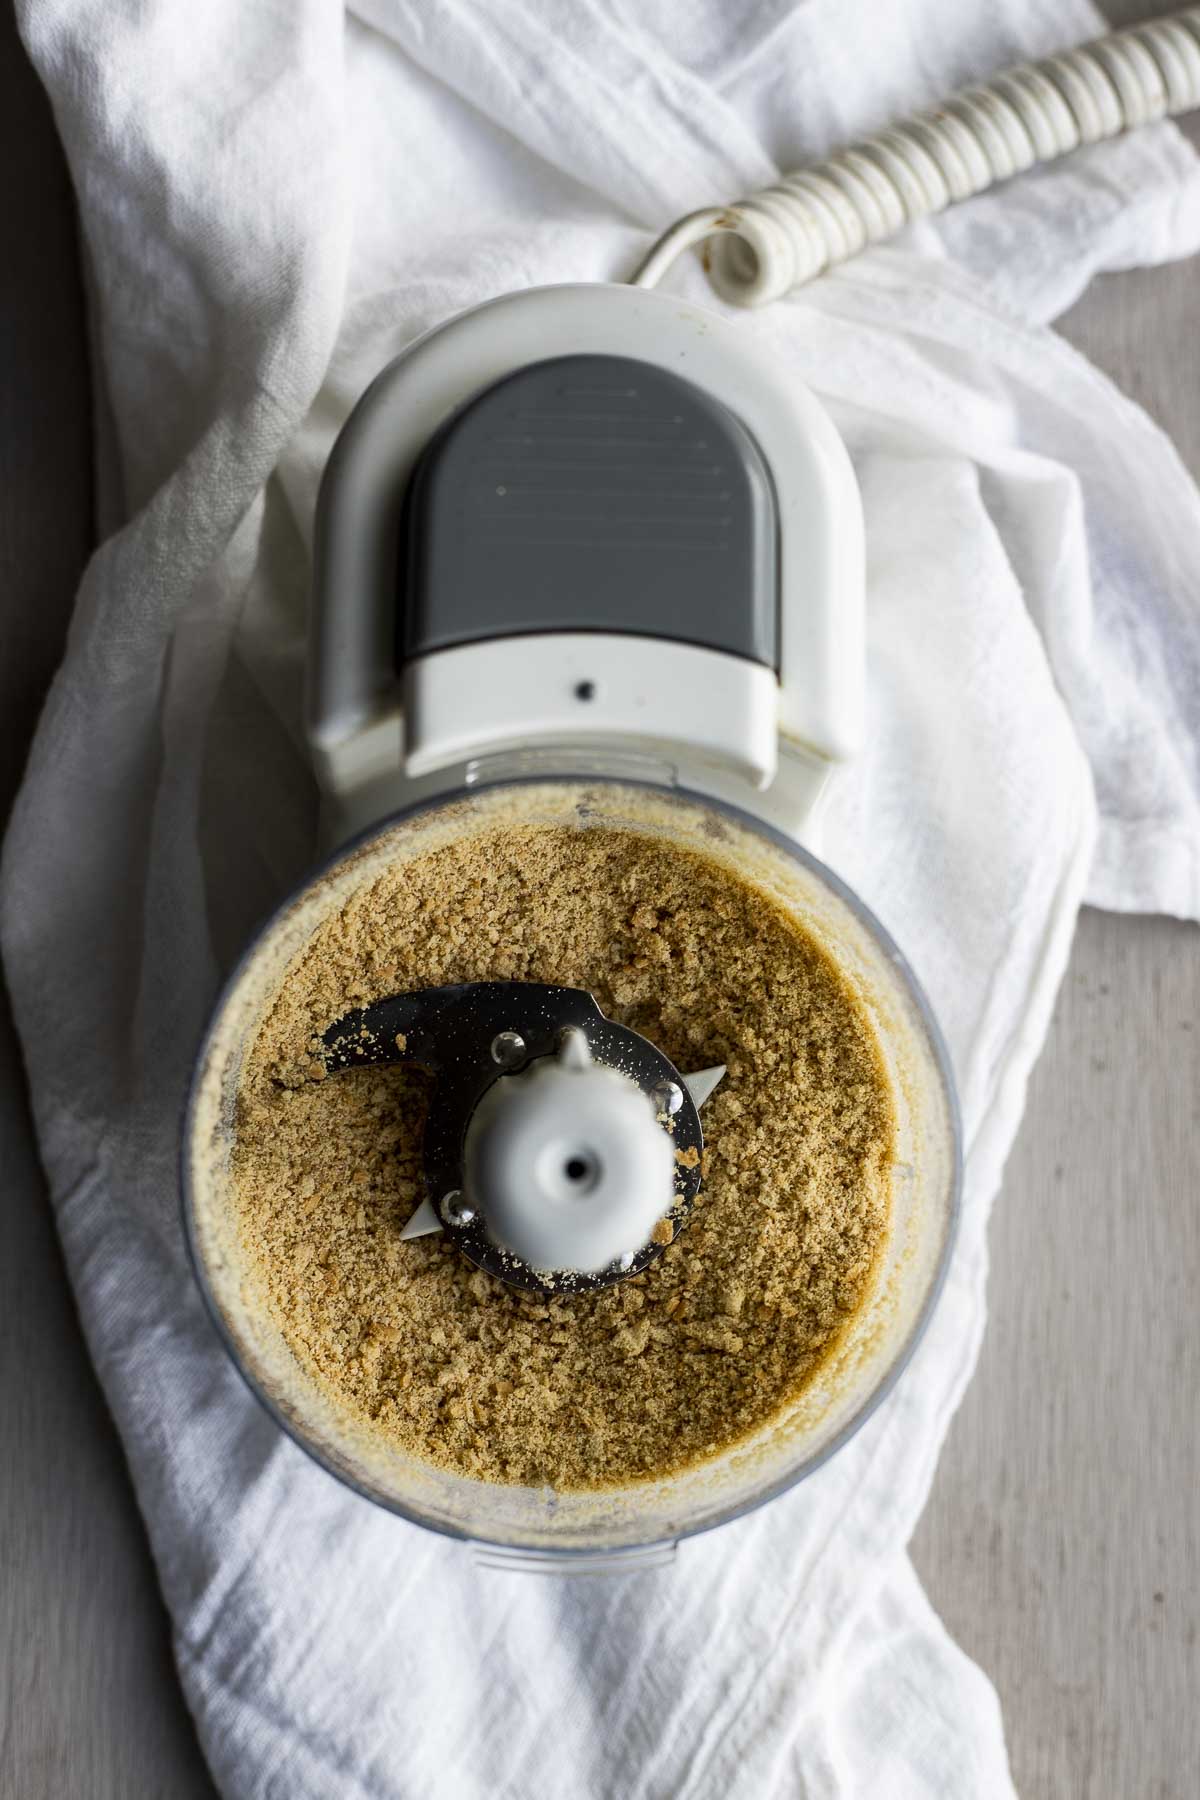 Blending up graham crackers in a food processor.